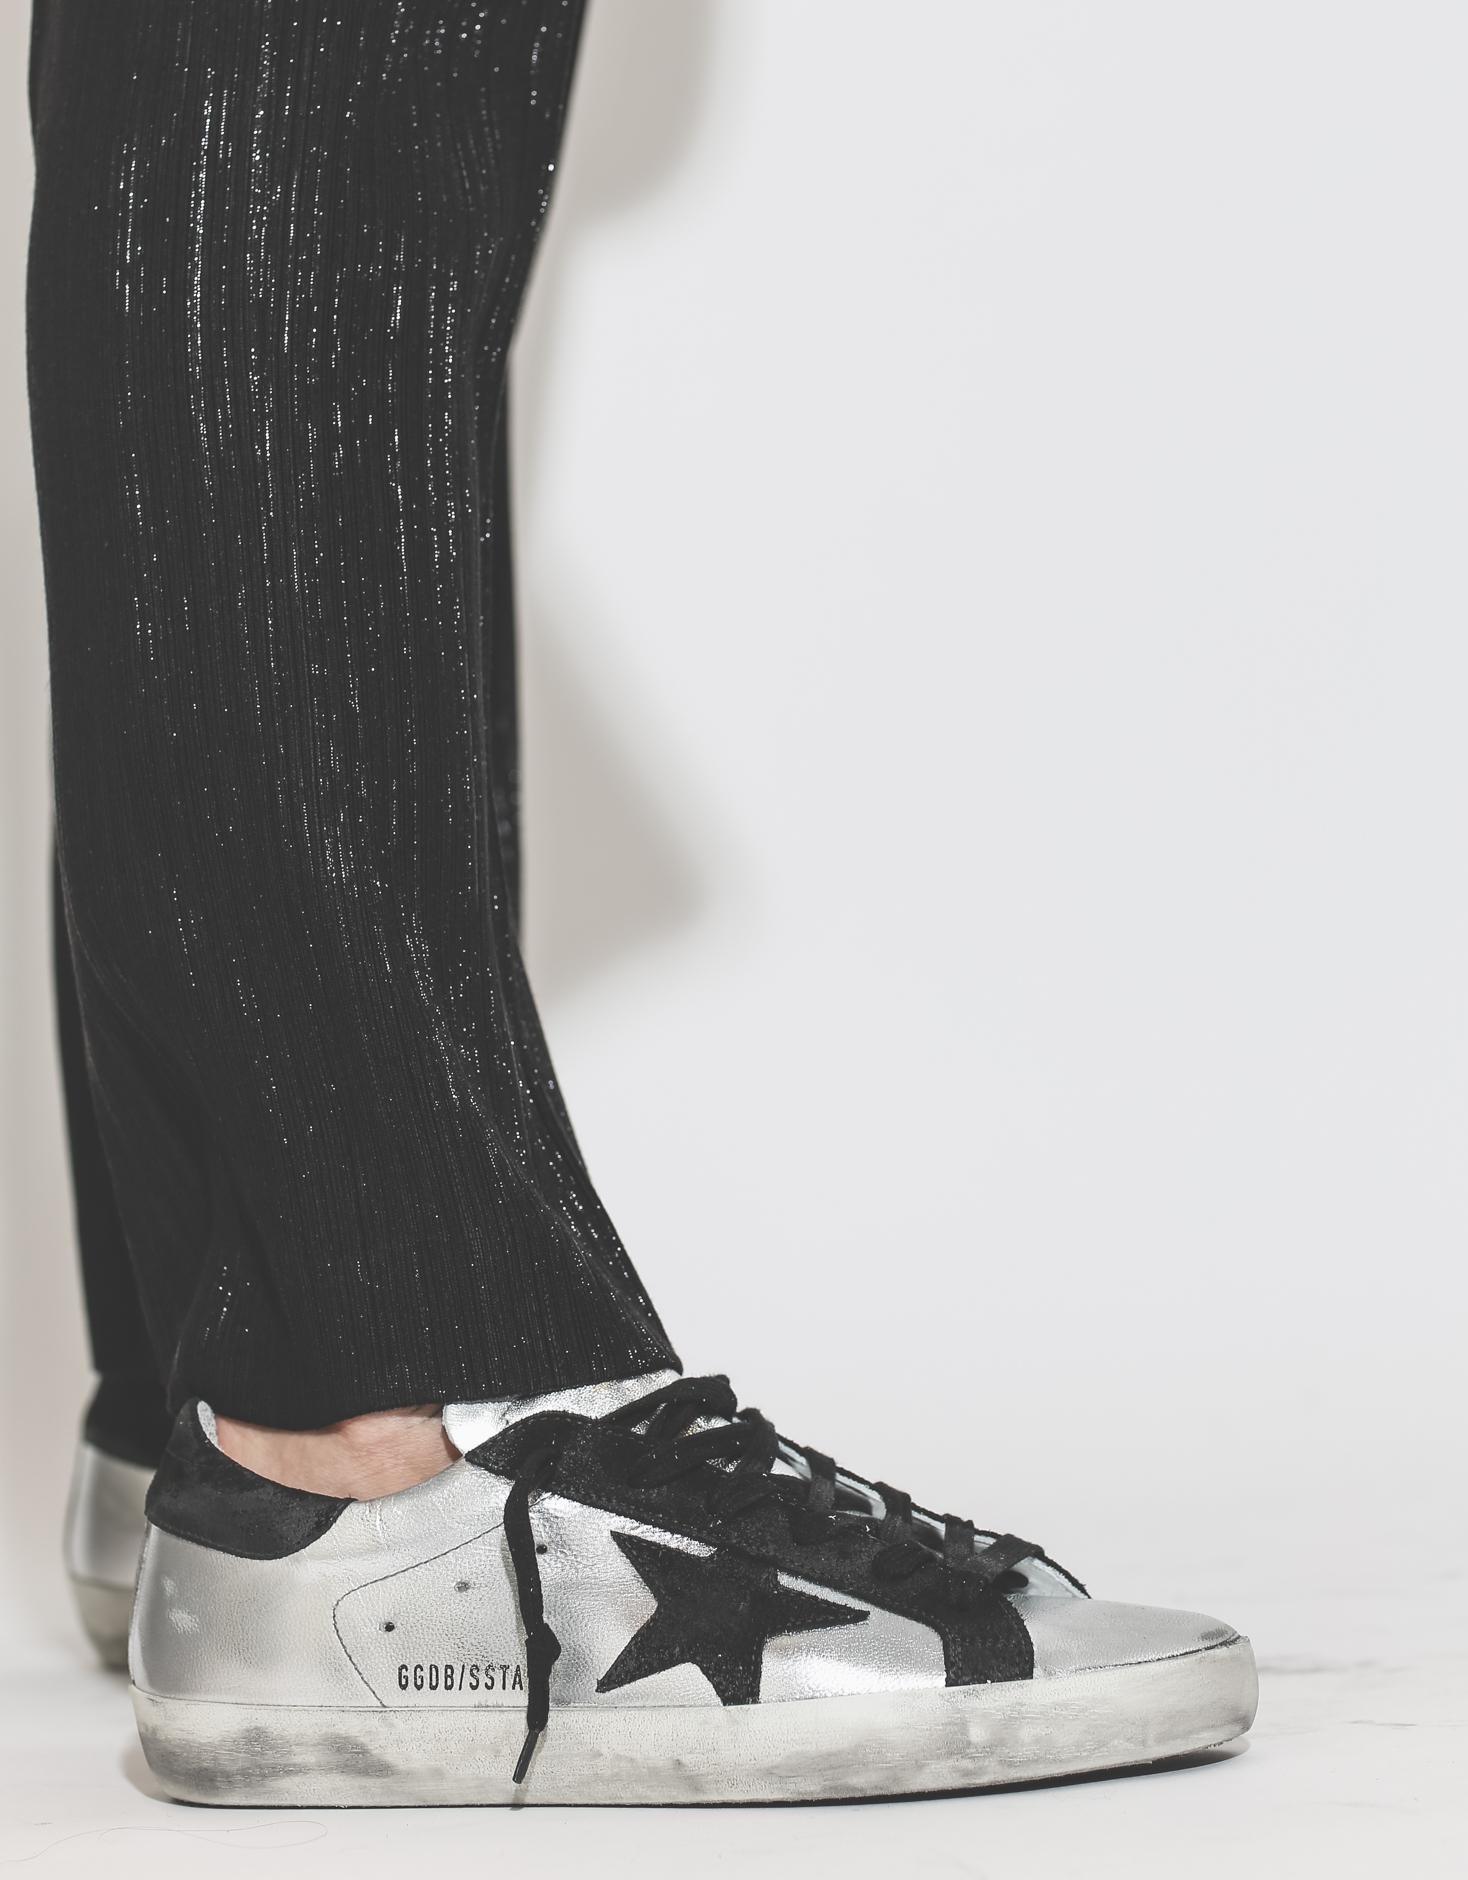 Golden Goose Woman Permanent Sneakers Superstar - Silver Black leather 